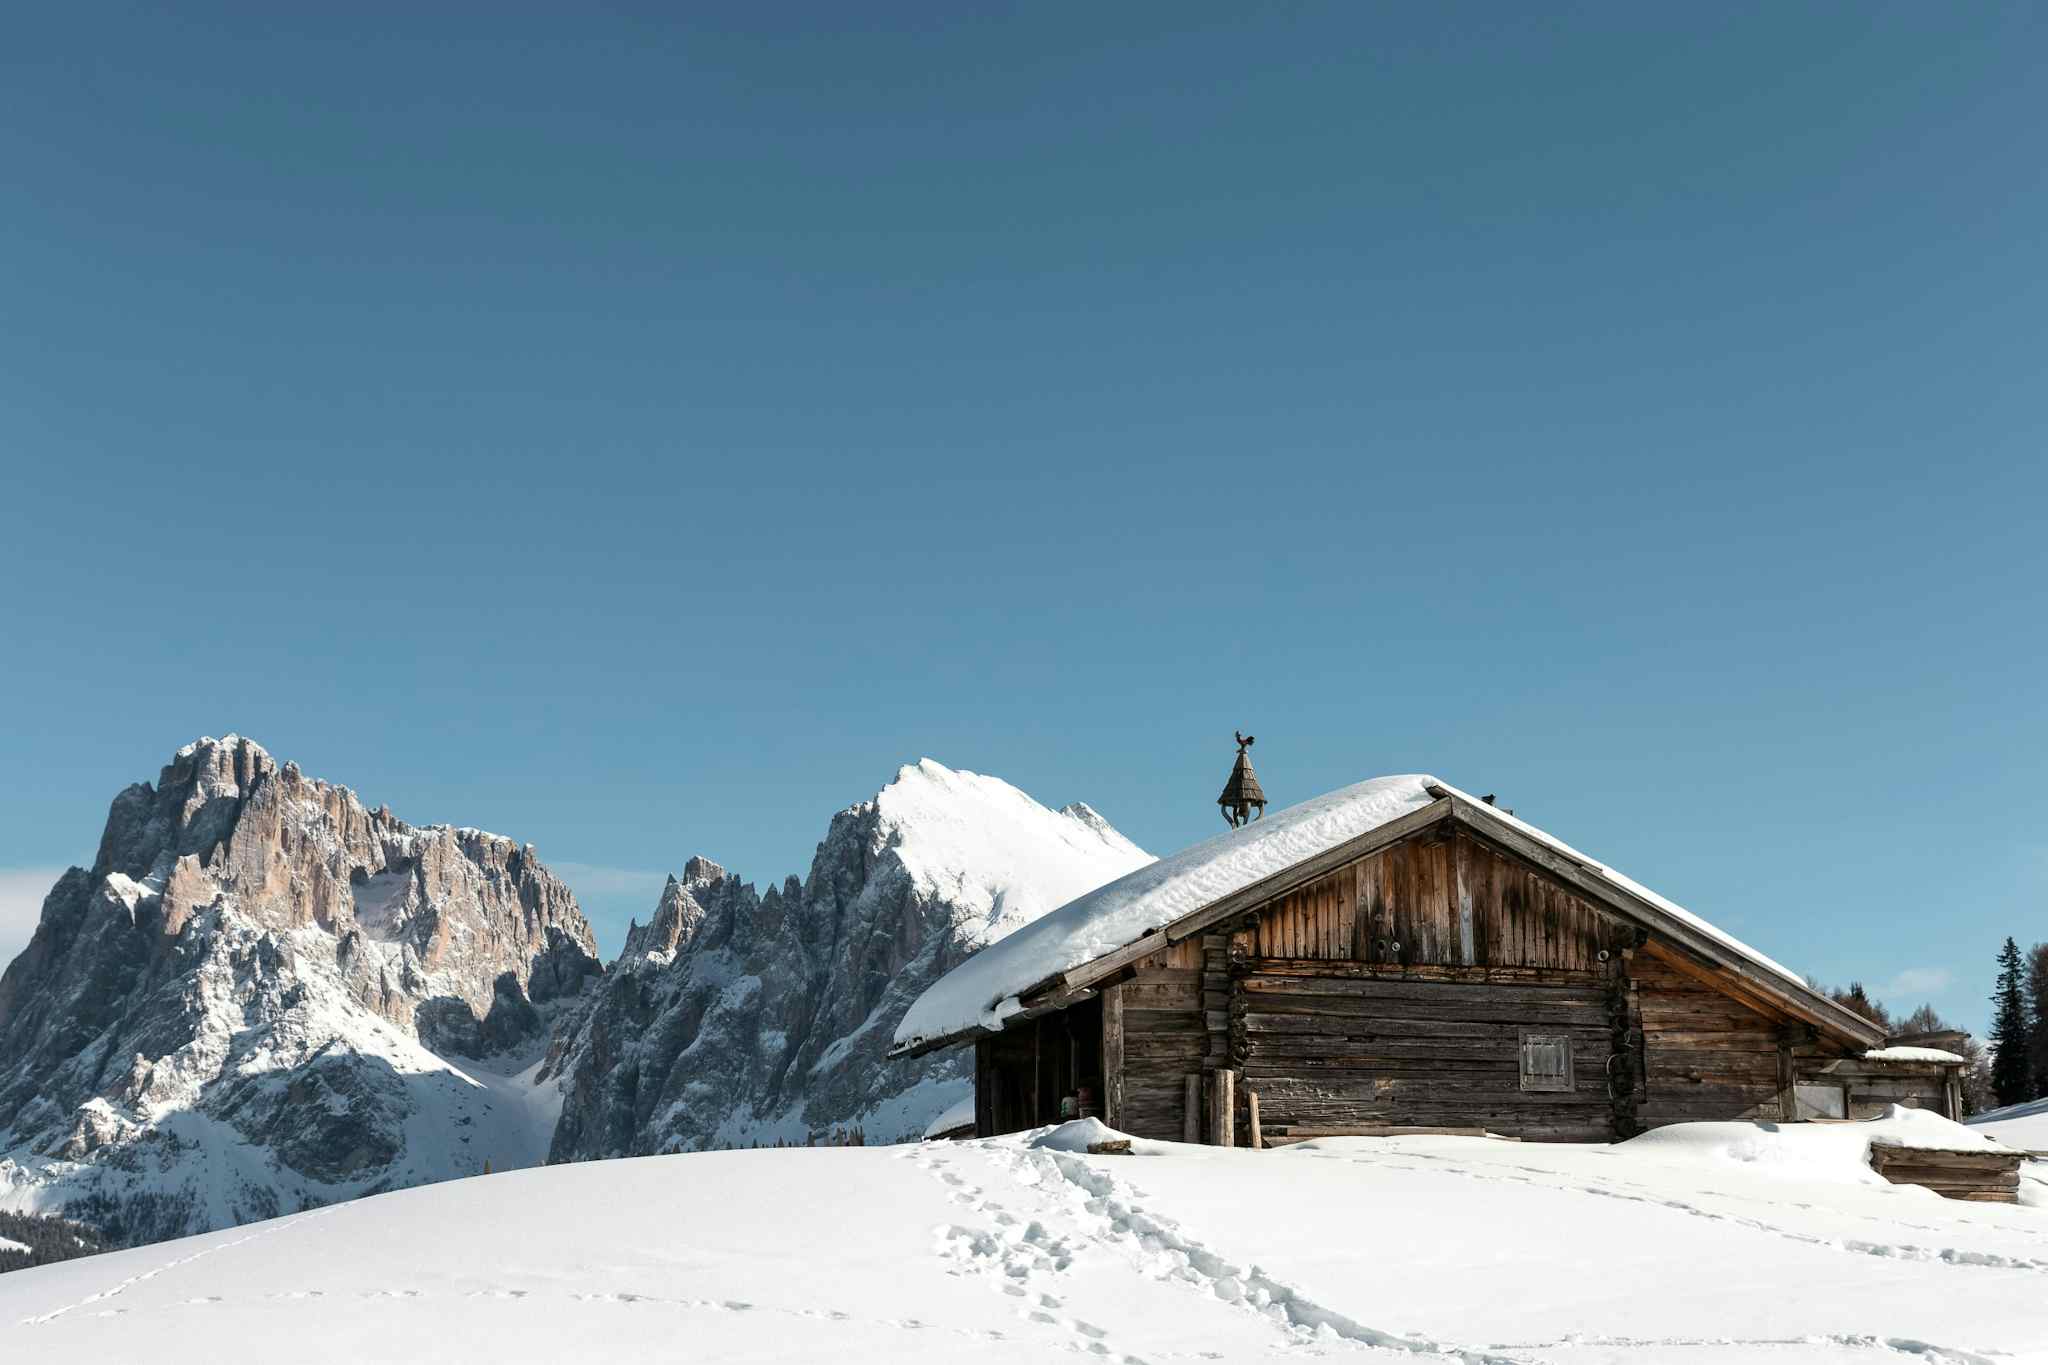 Snow-covered hut with the jagged Dolomite Mountains in the background, Italy.